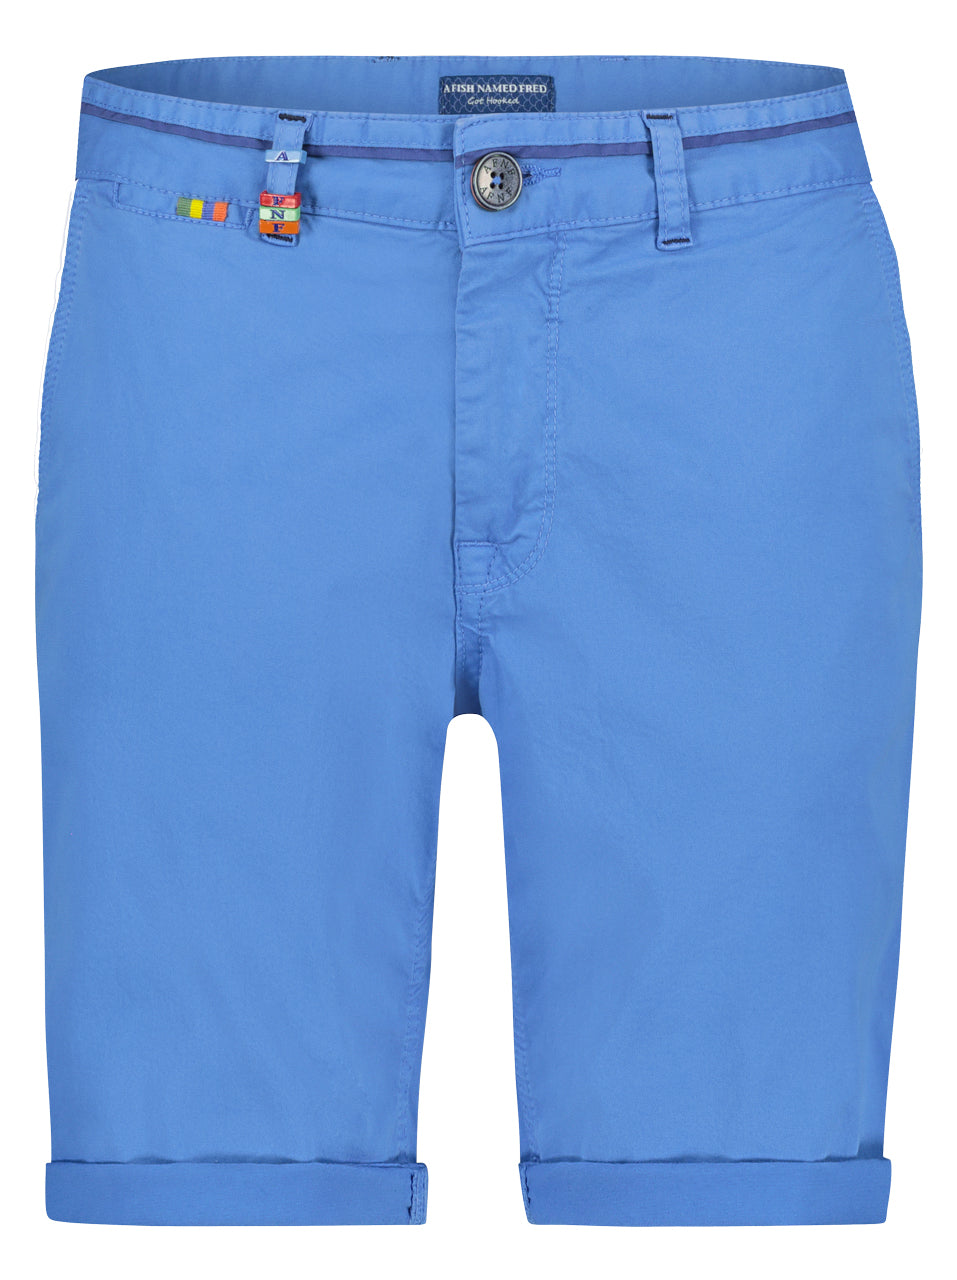 A Fish Named Fred - Slim Fit Chino Short in Cobalt